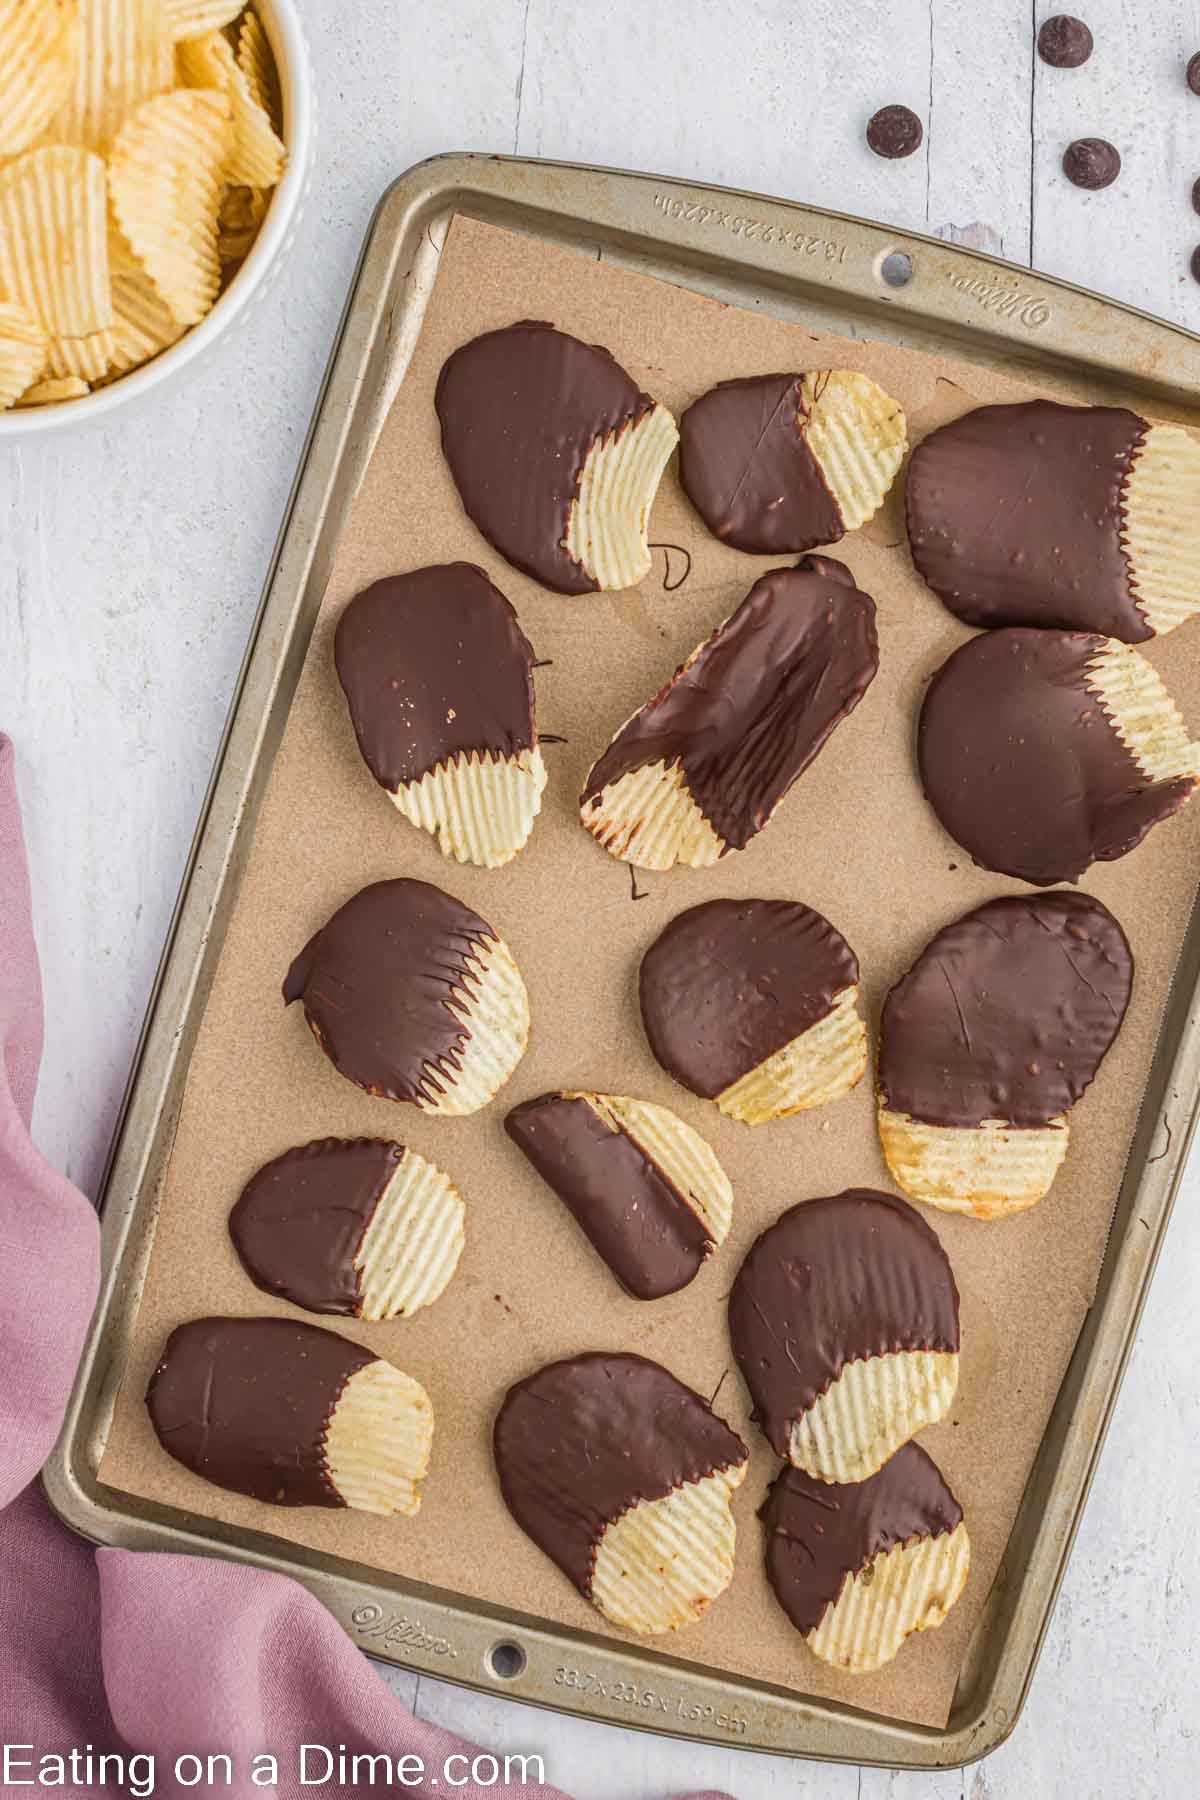 Chocolate Covered Chips on a baking sheet